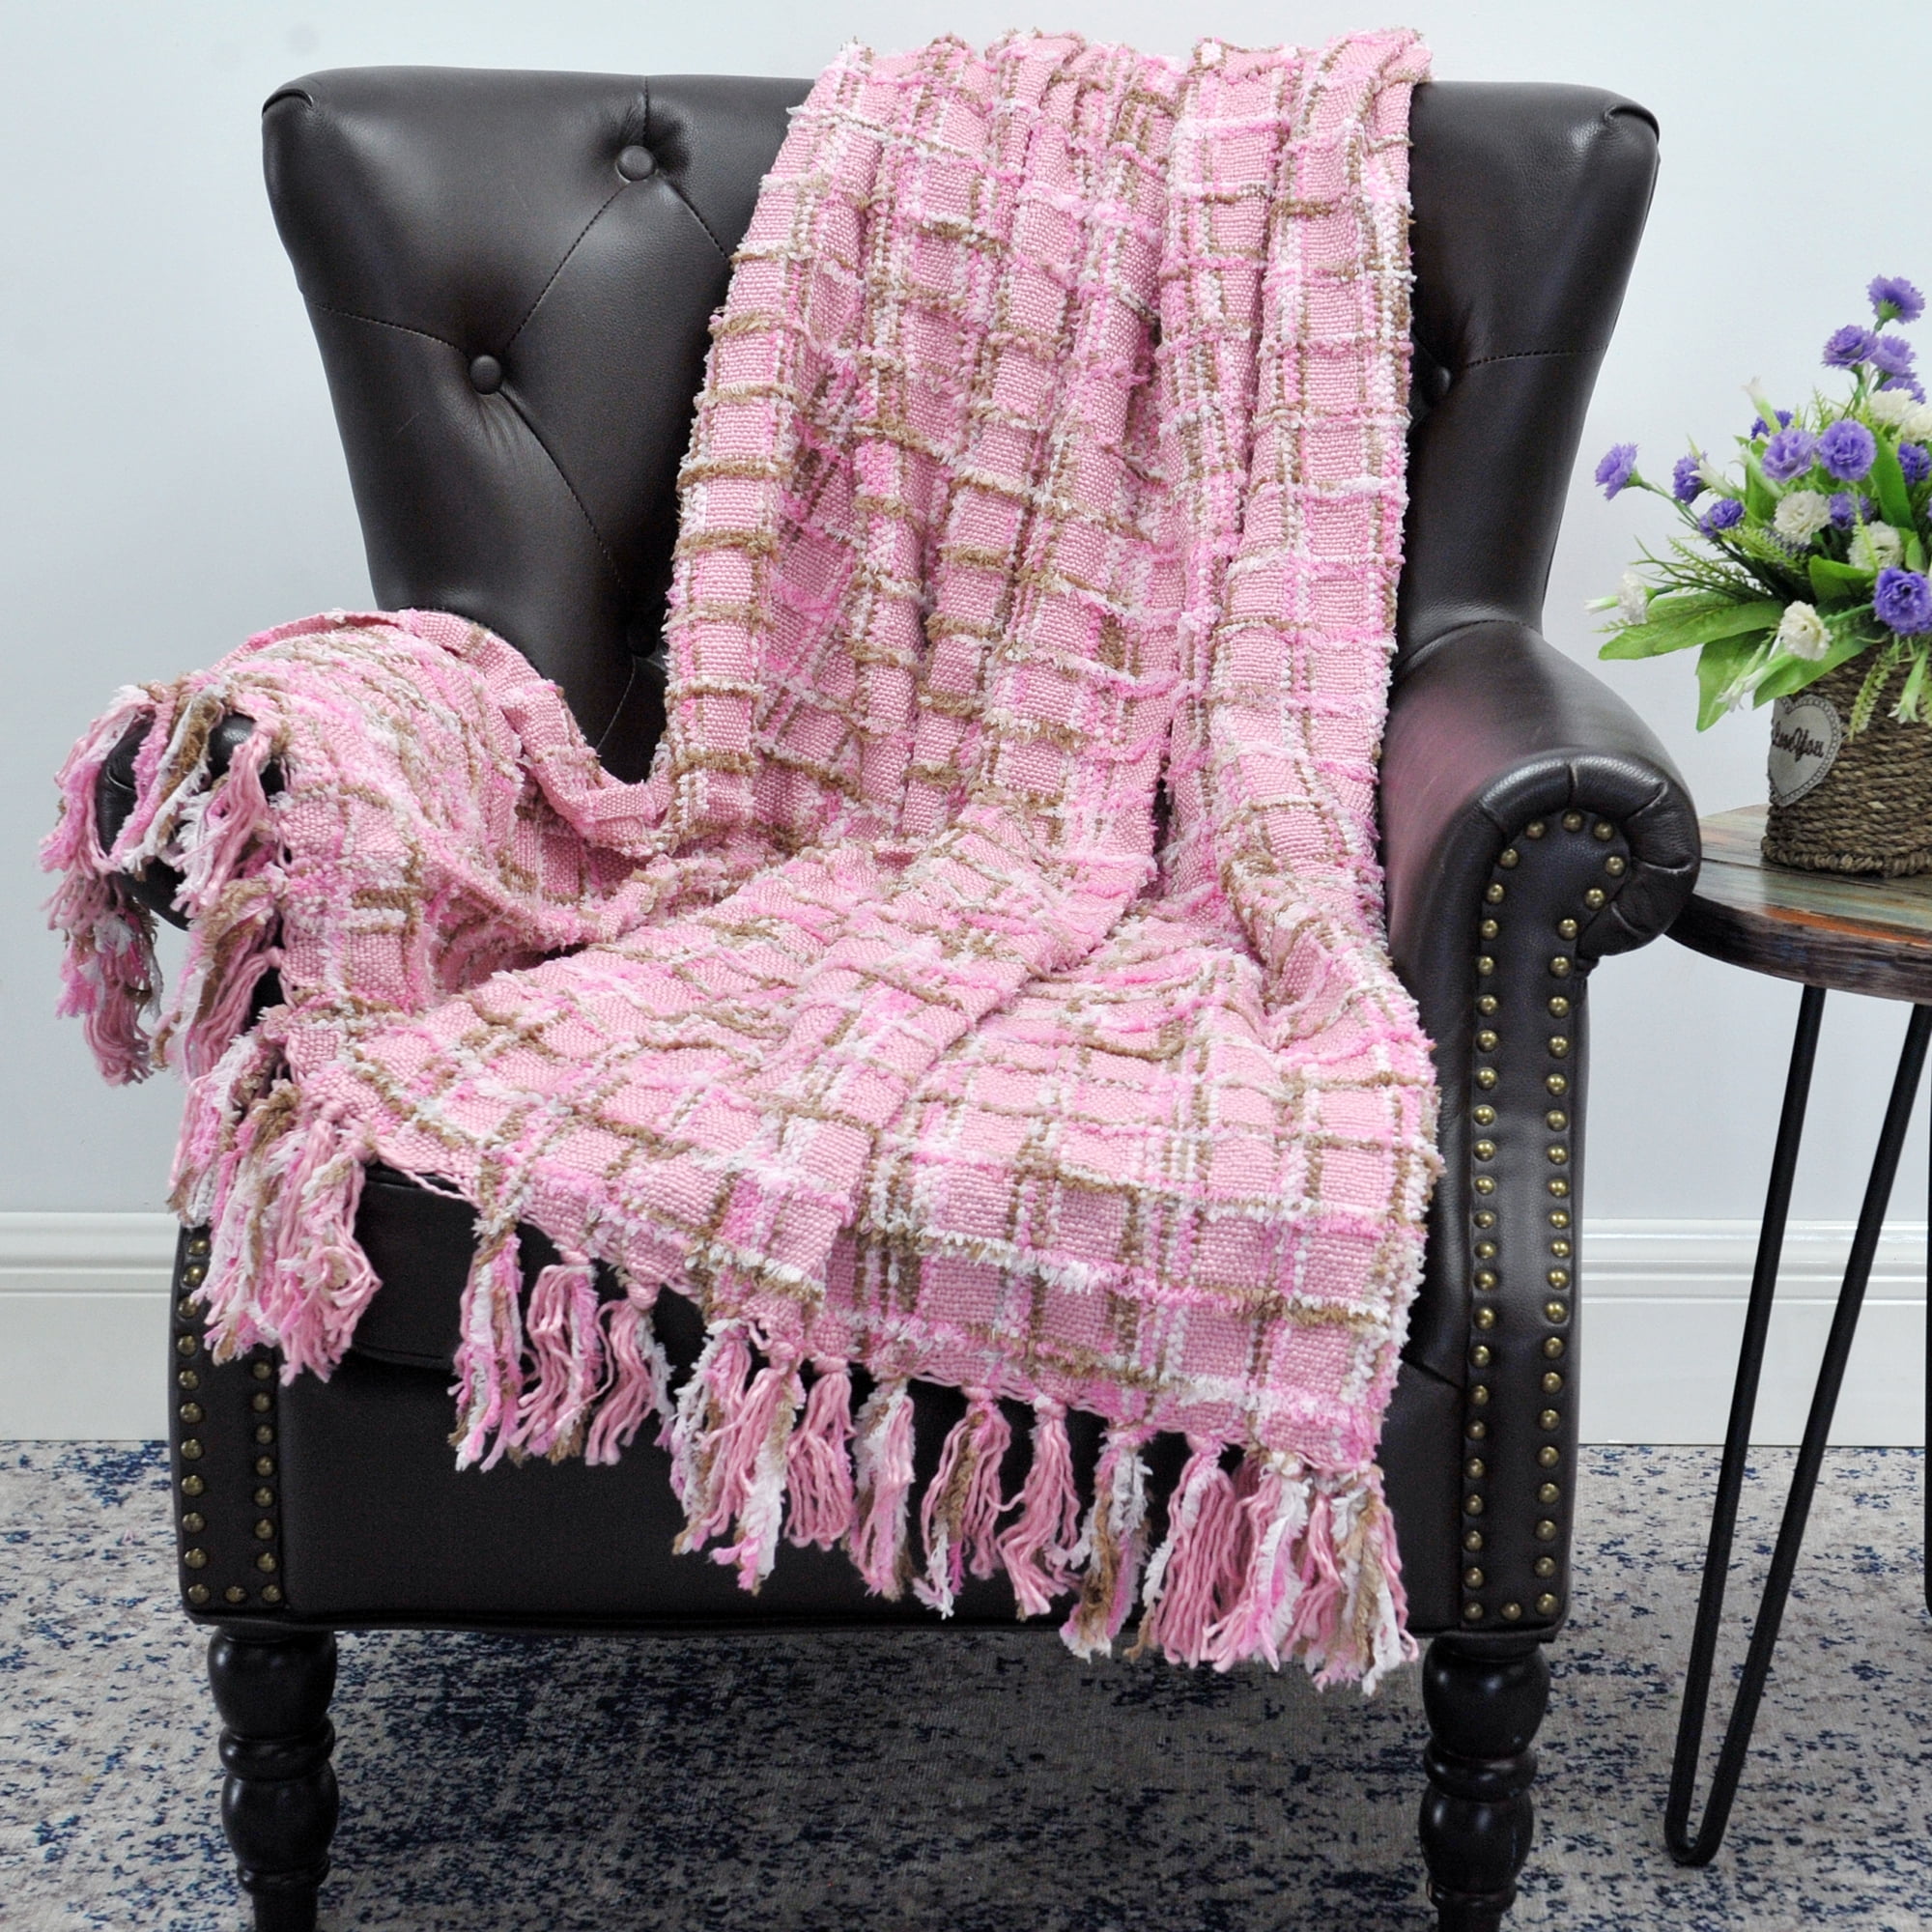 Home Soft Things Multi Color Chenille Throw - Light Pink - 50 x 60